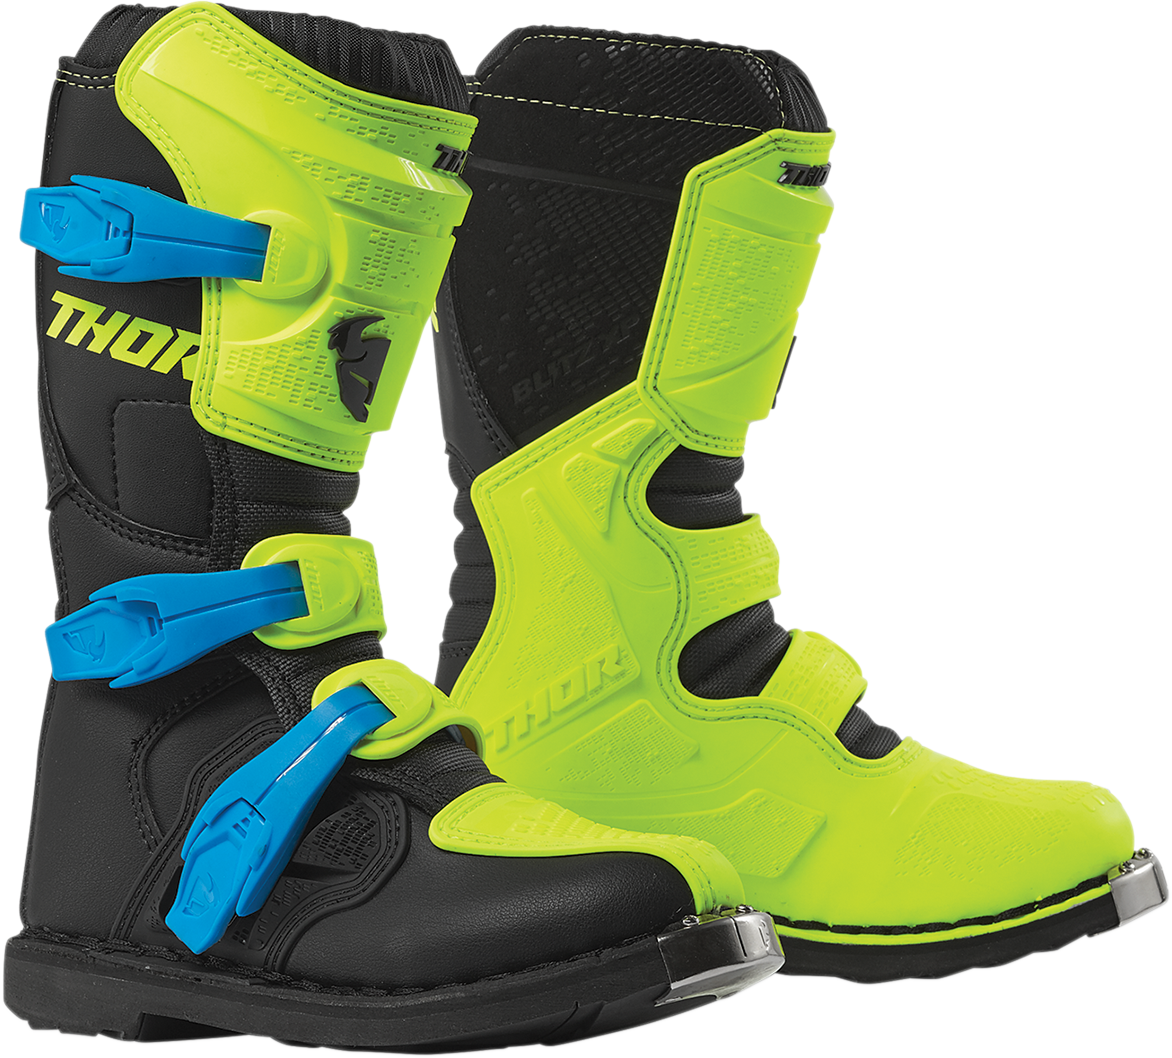 Youth Blitz XP Boots - Green Fluorescent/Black - Size 3